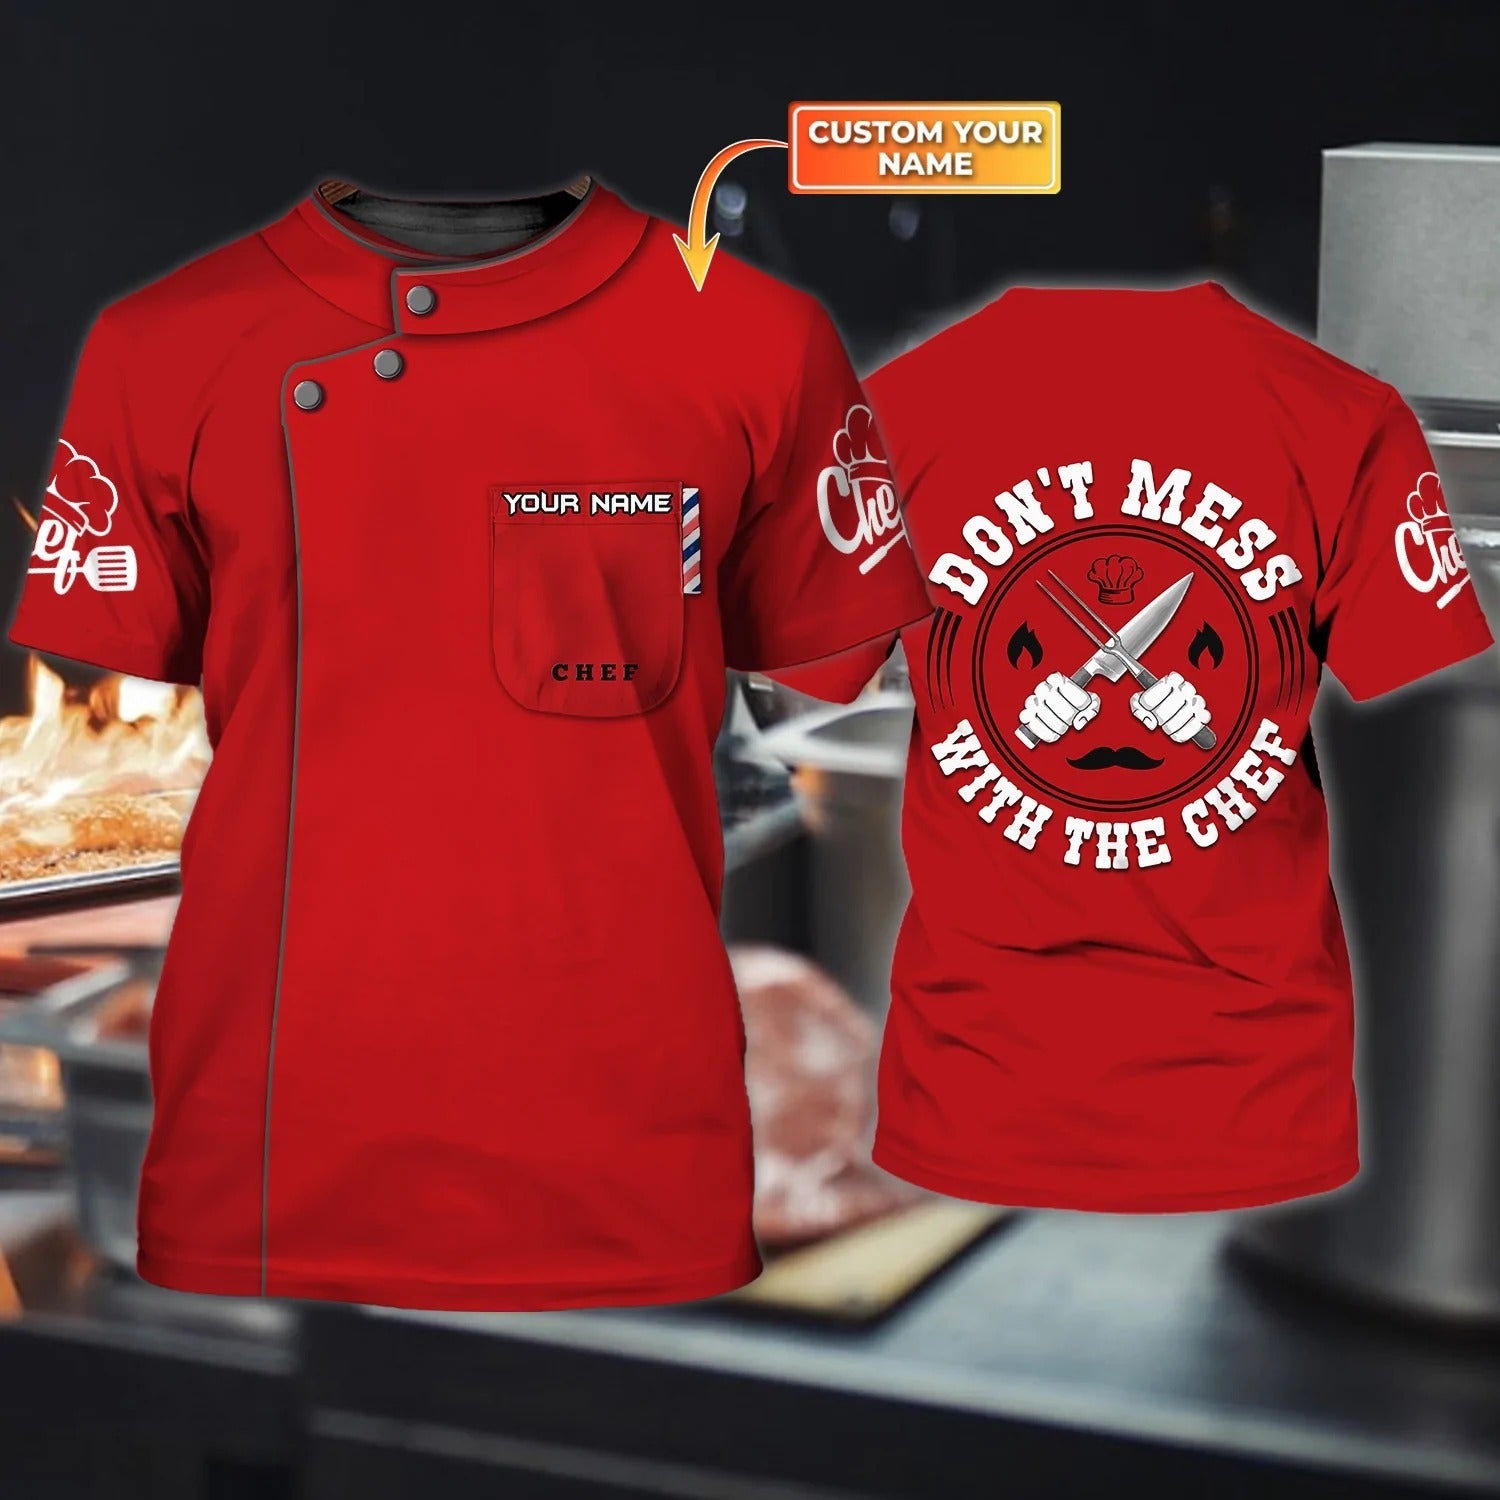 Custom Red Shirt For Master Chef/ Best Gift For Chef Friend/ Don''t Mess With The Chef Shirt